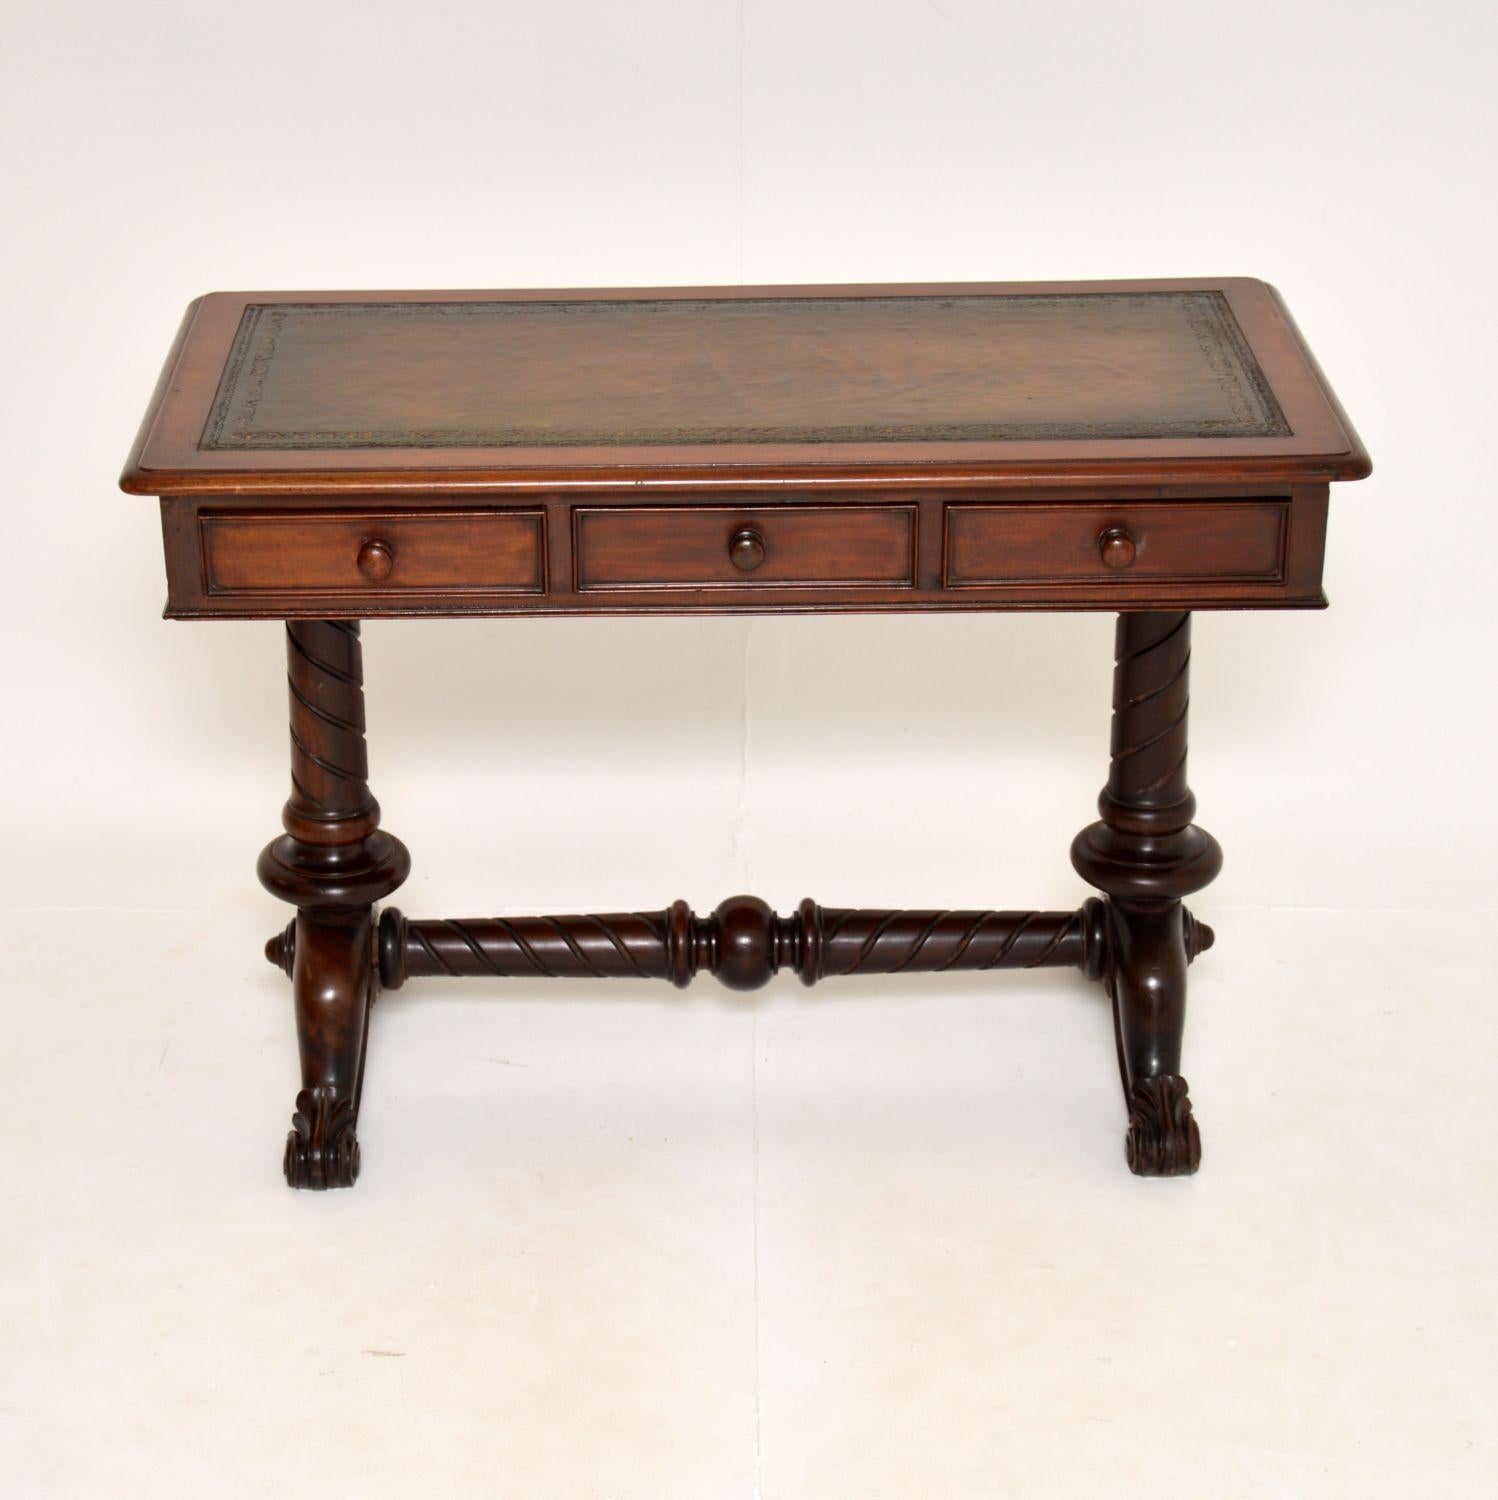 A fantastic original William IV period desk. This was made in England, it dates from around the 1830-1840’s.

It is of amazing quality and is of lovely proportions. The top has three drawers with turned wooden handles, and it sits on a very bold